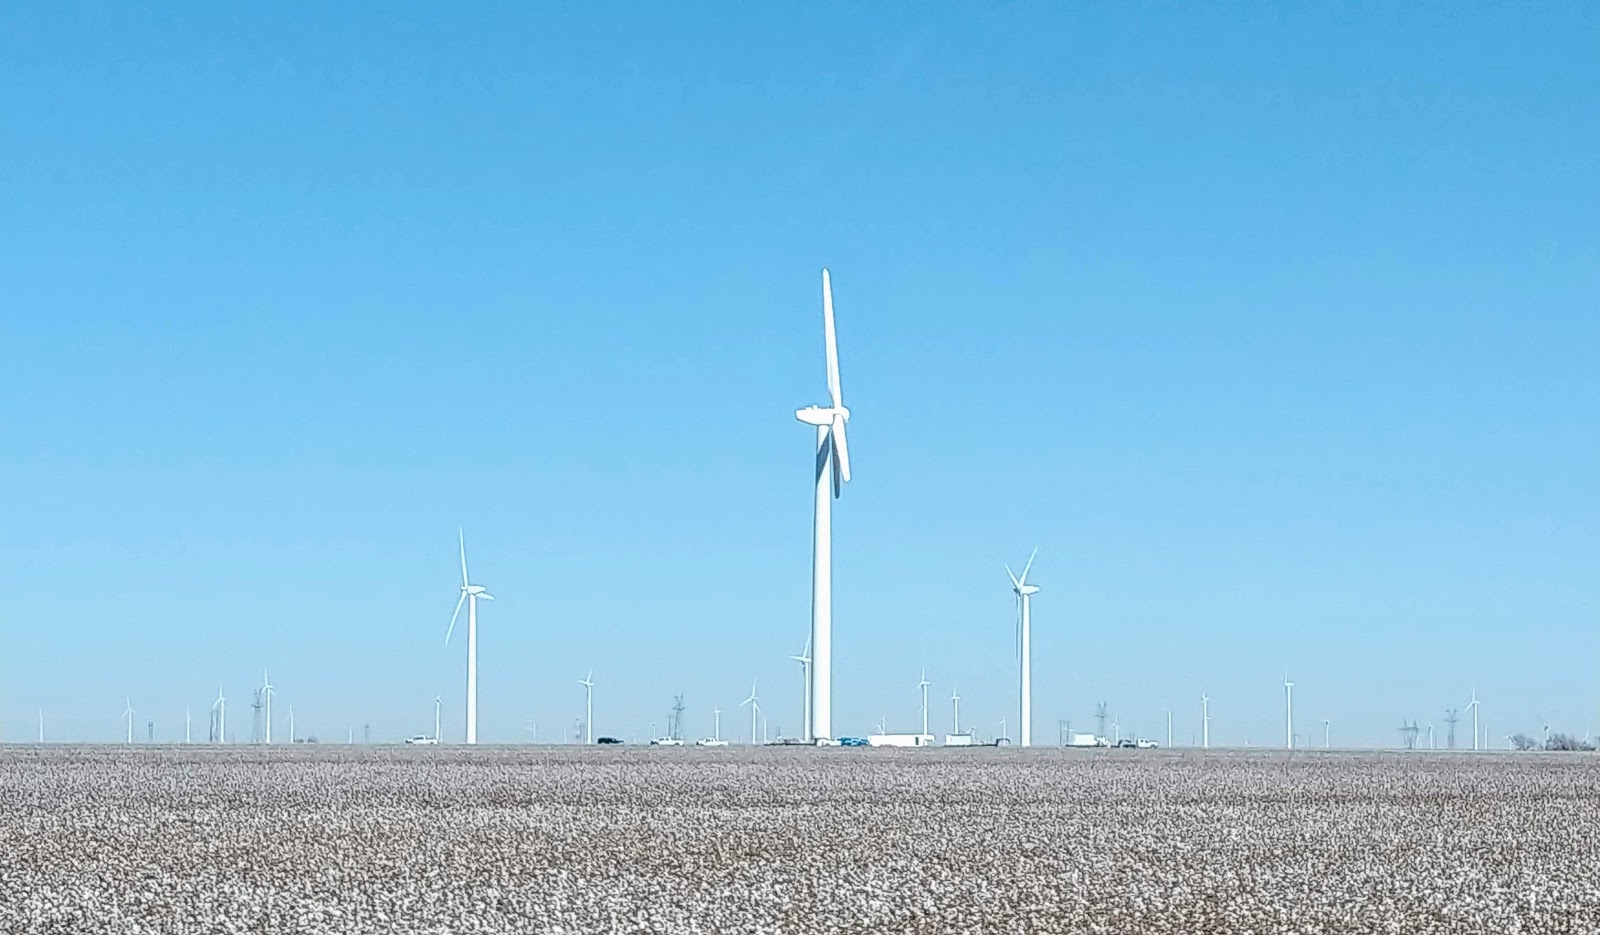 Image showing windmills on the plains of Texas.